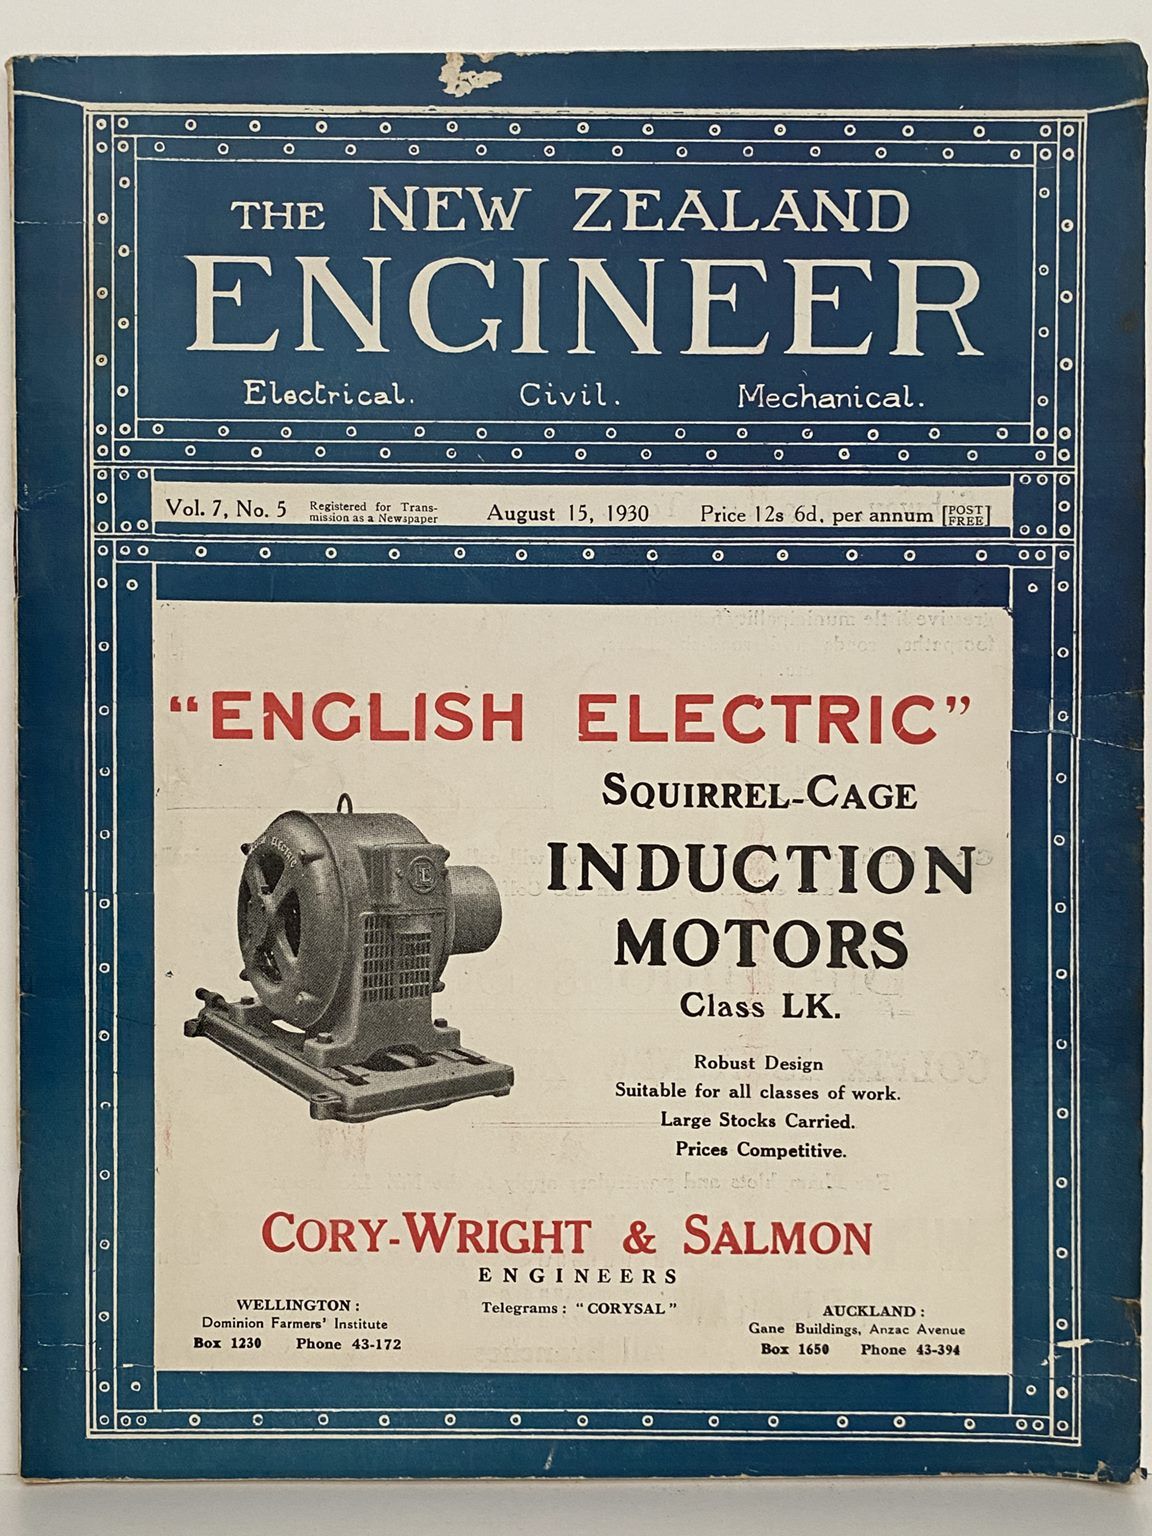 OLD MAGAZINE: The New Zealand Engineer Vol. 7, No. 5 - 15 August 1930